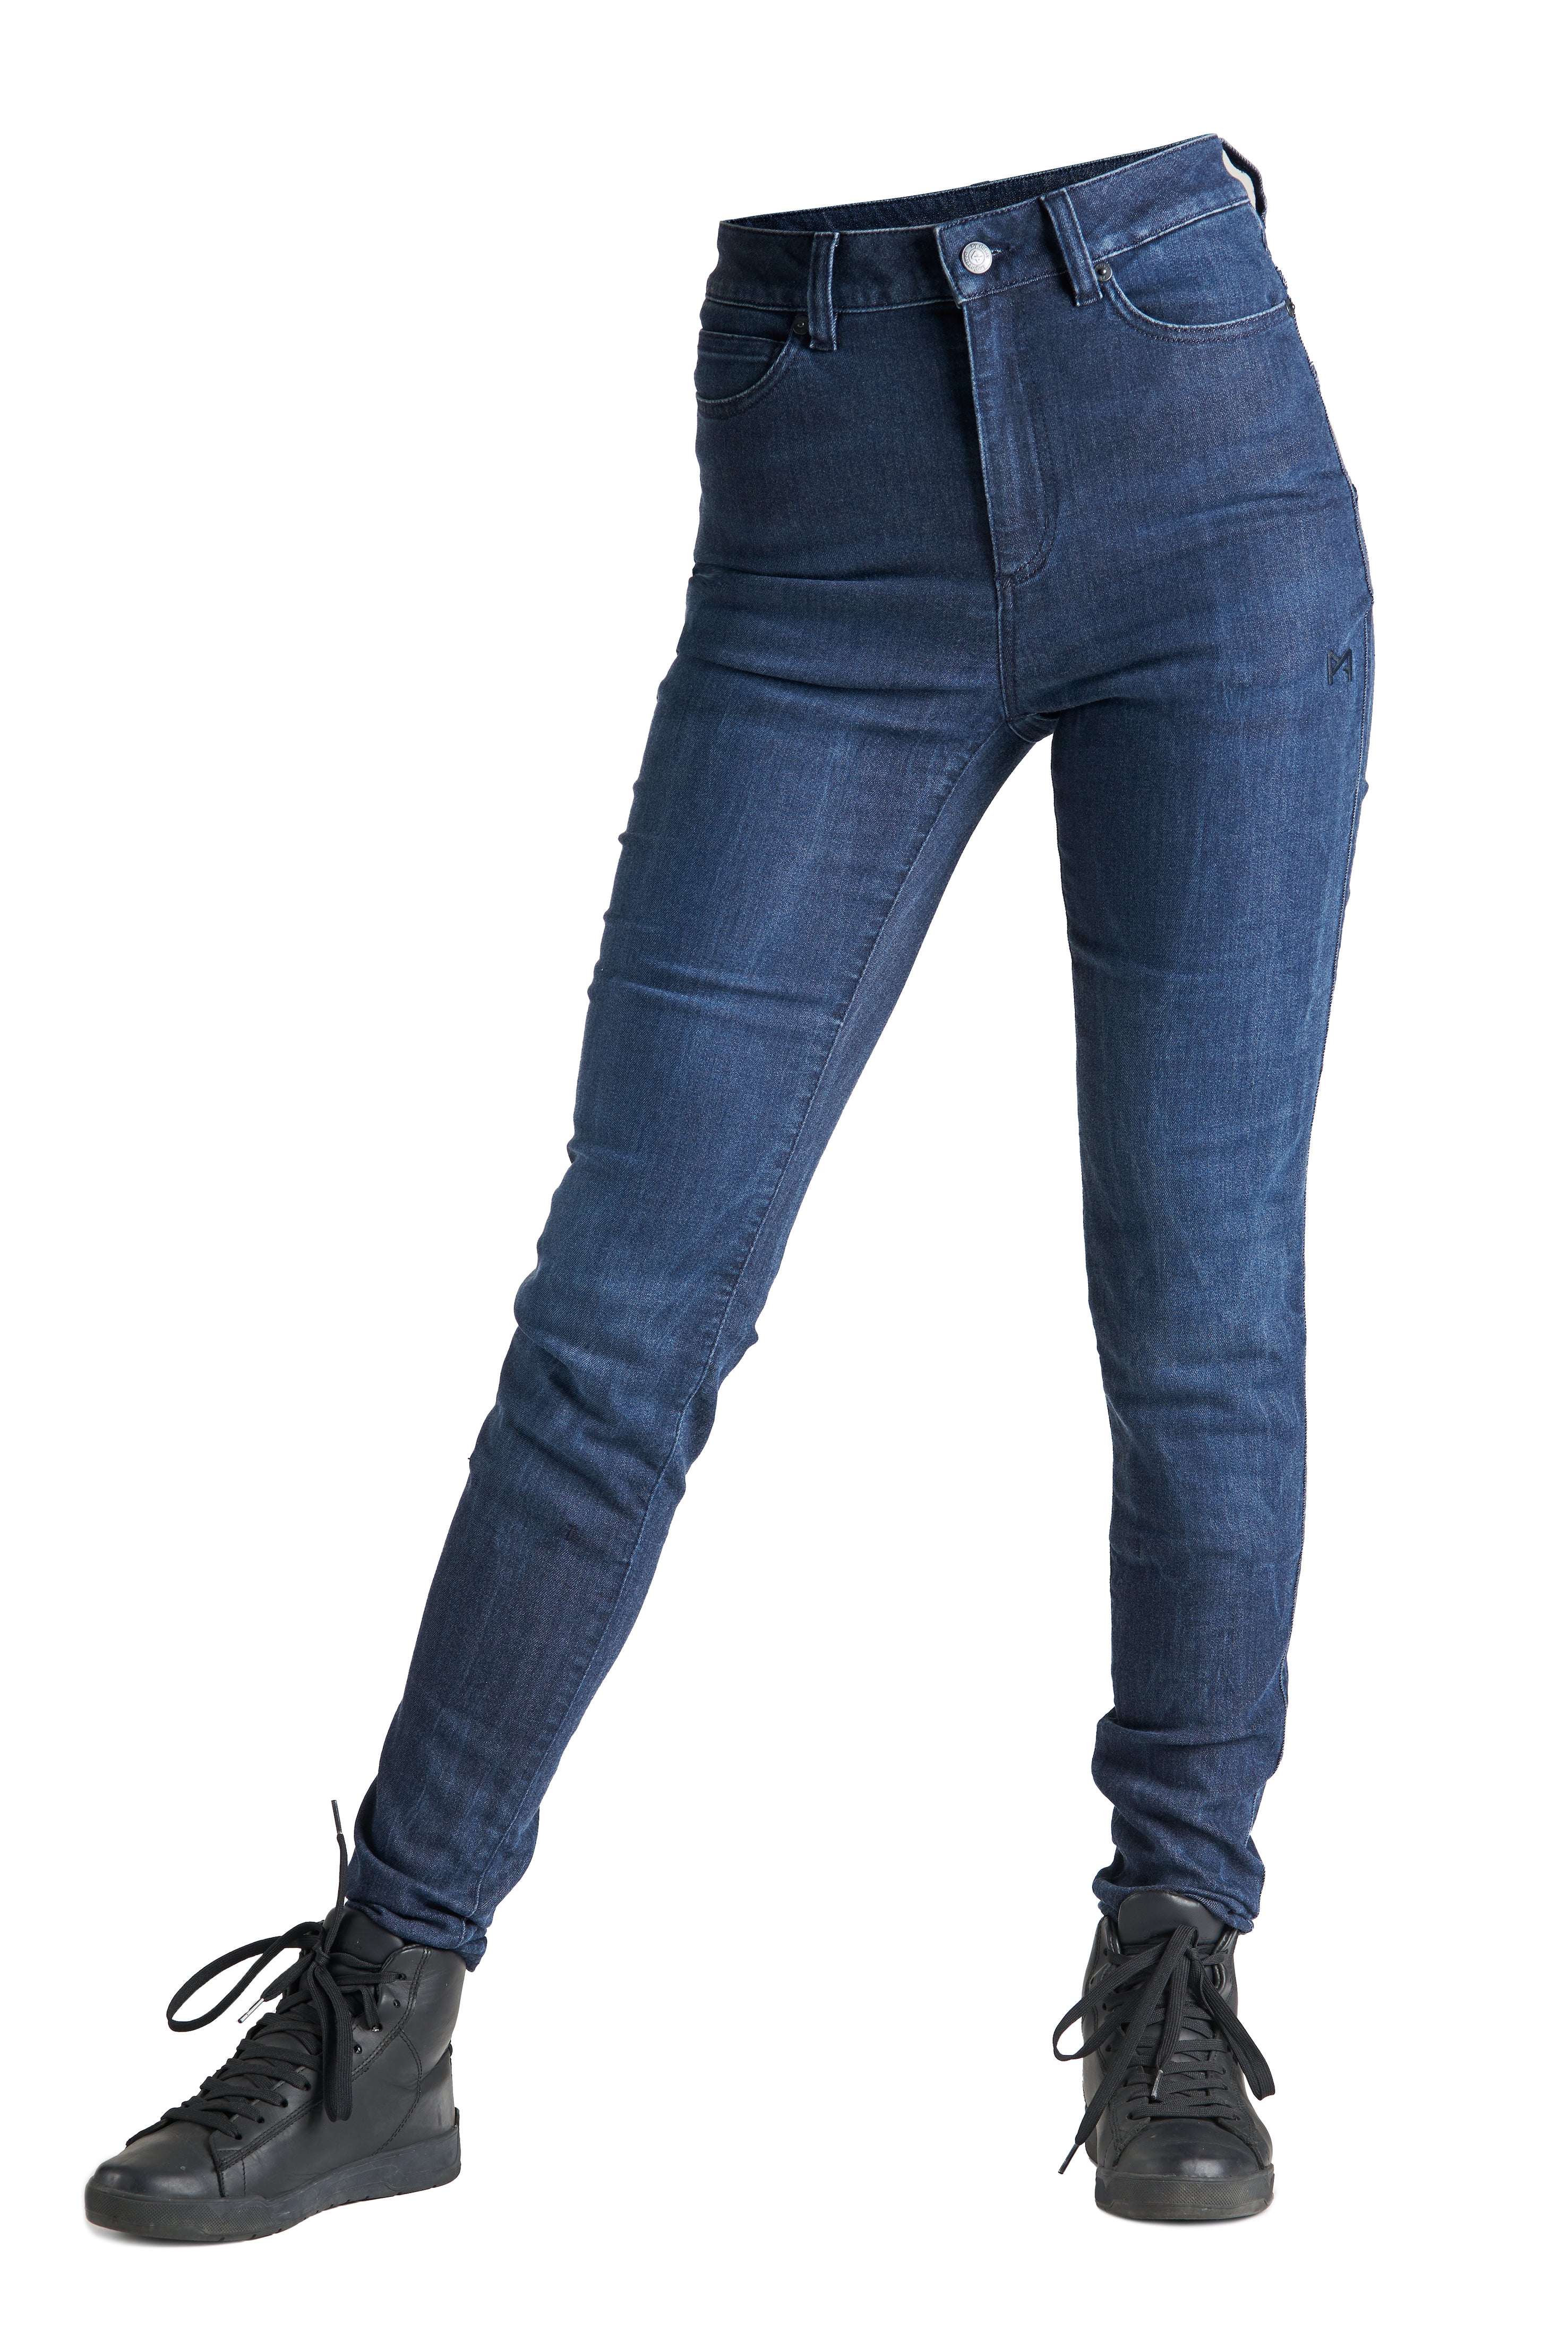 Woman&#39;s motorcycle blue jeans